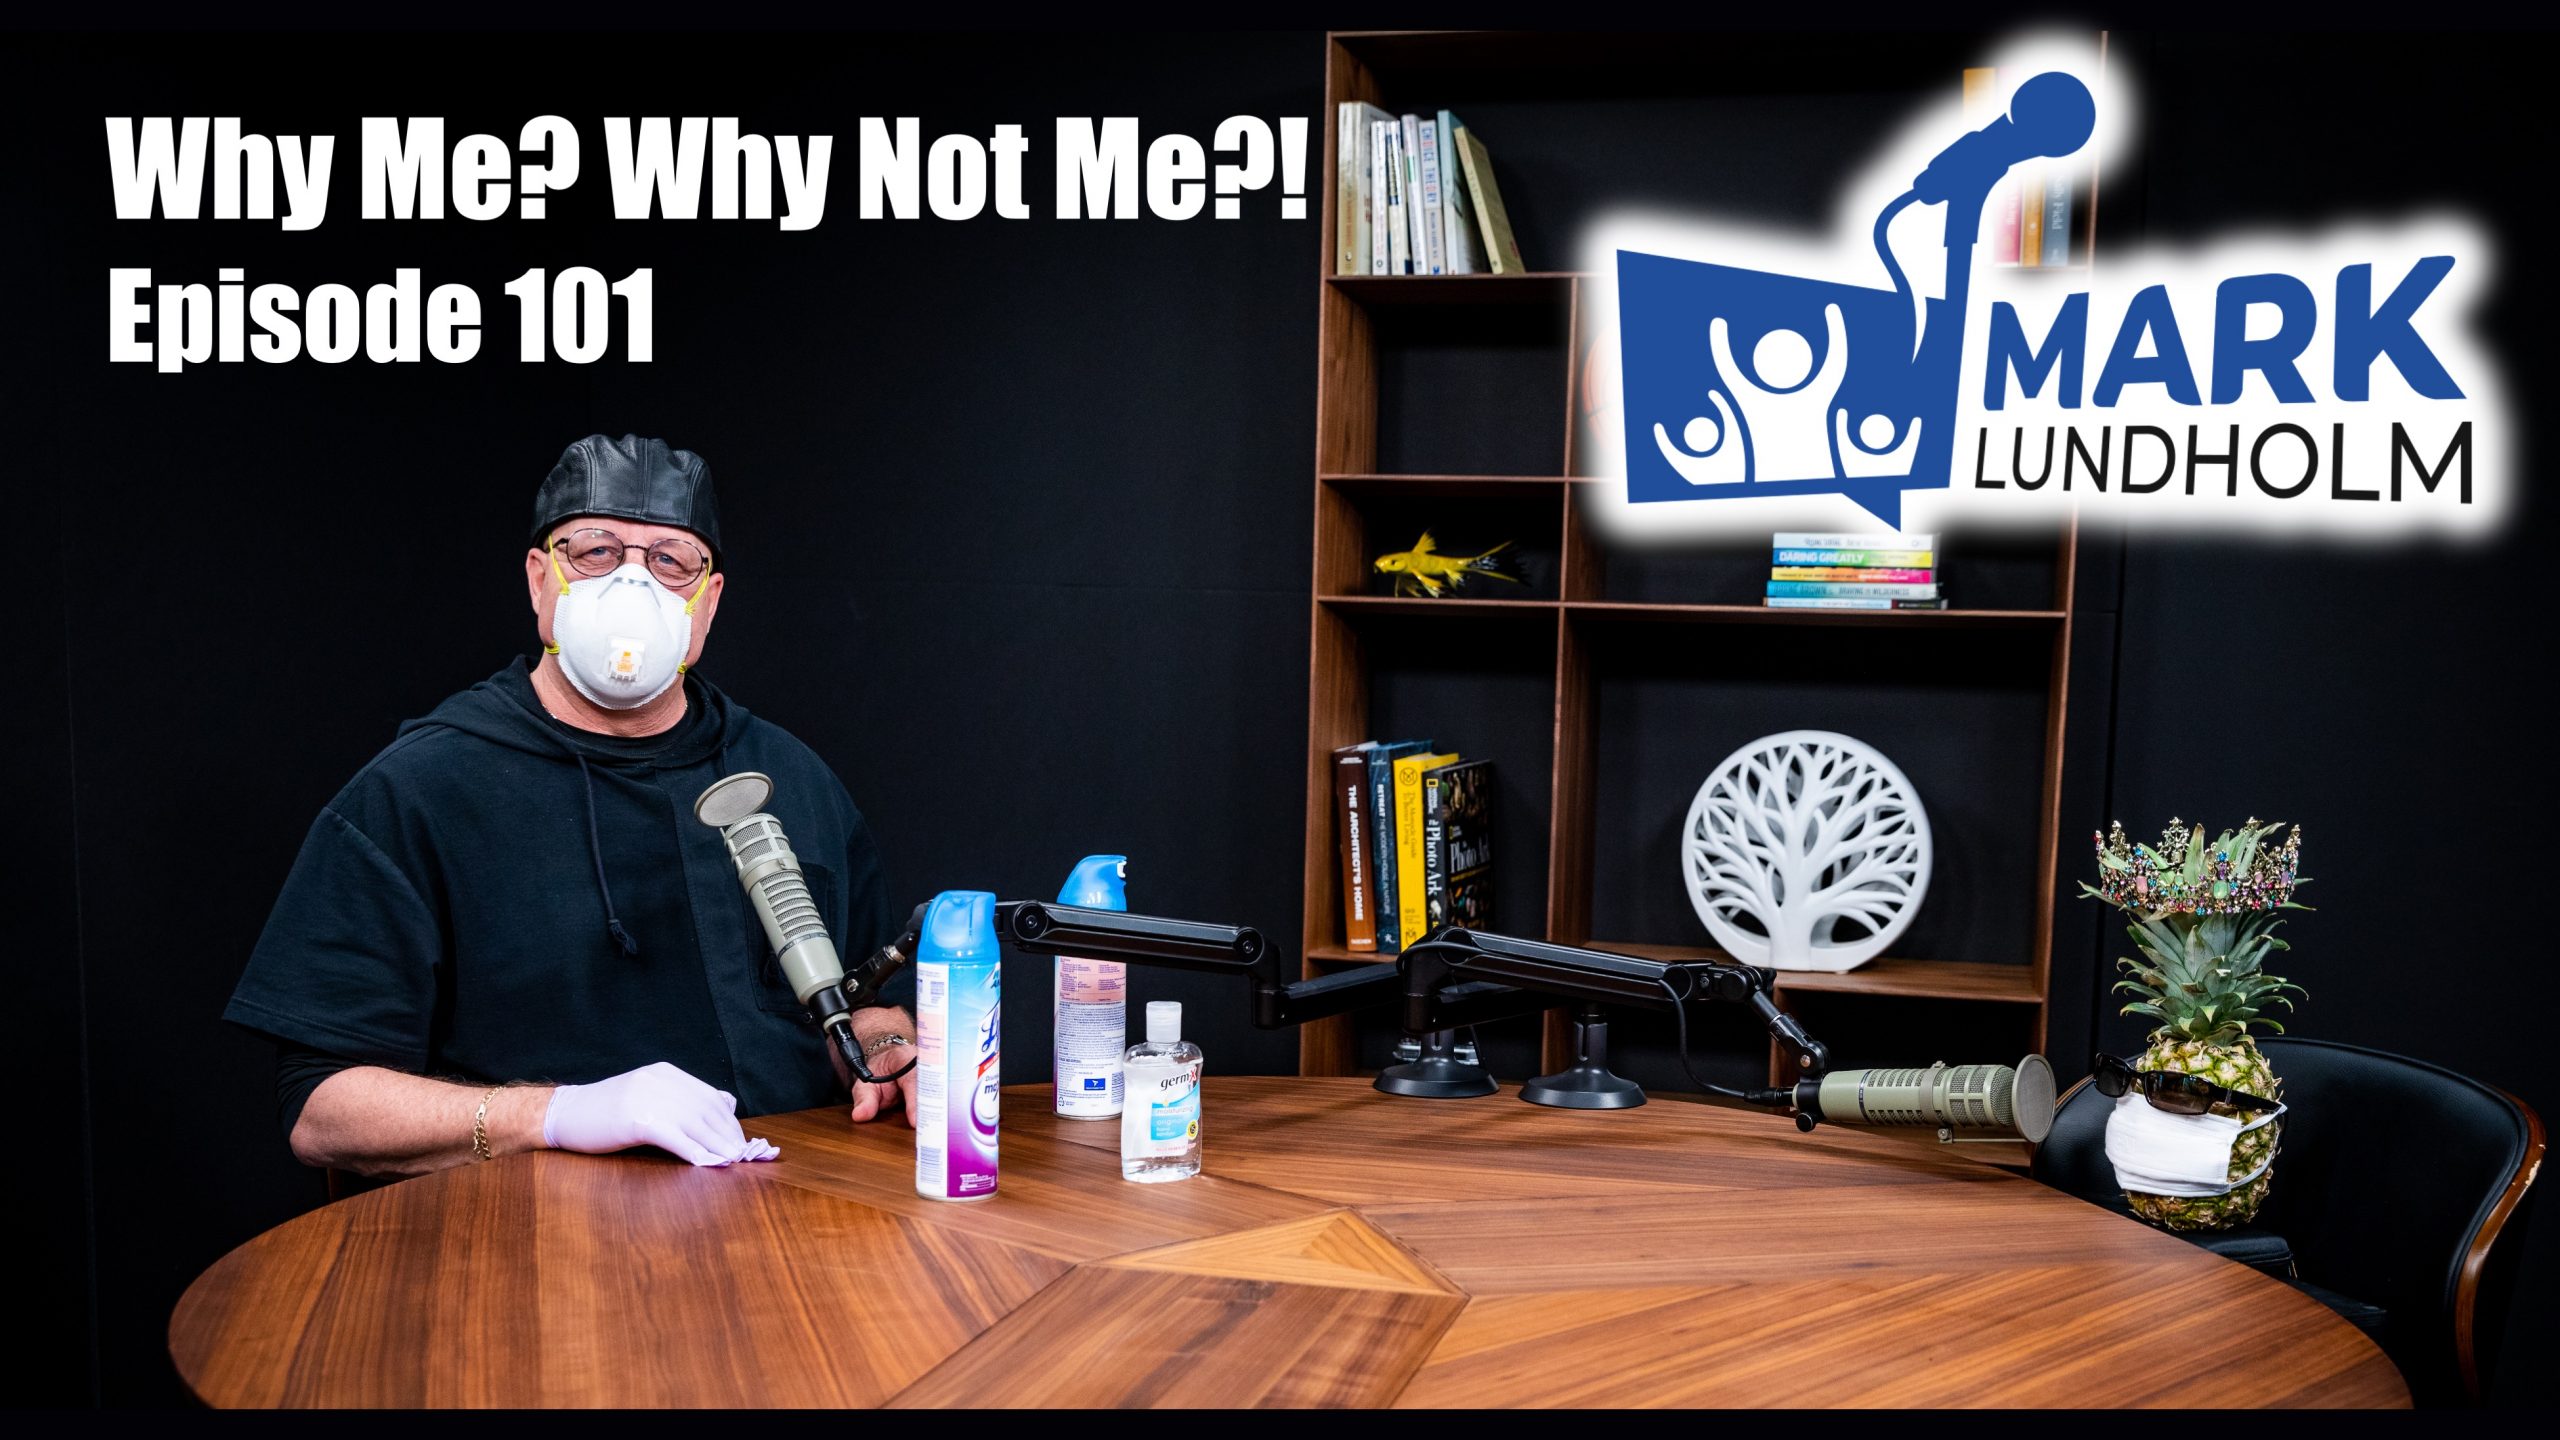 Episode 101: Why Me? Why Not Me?!